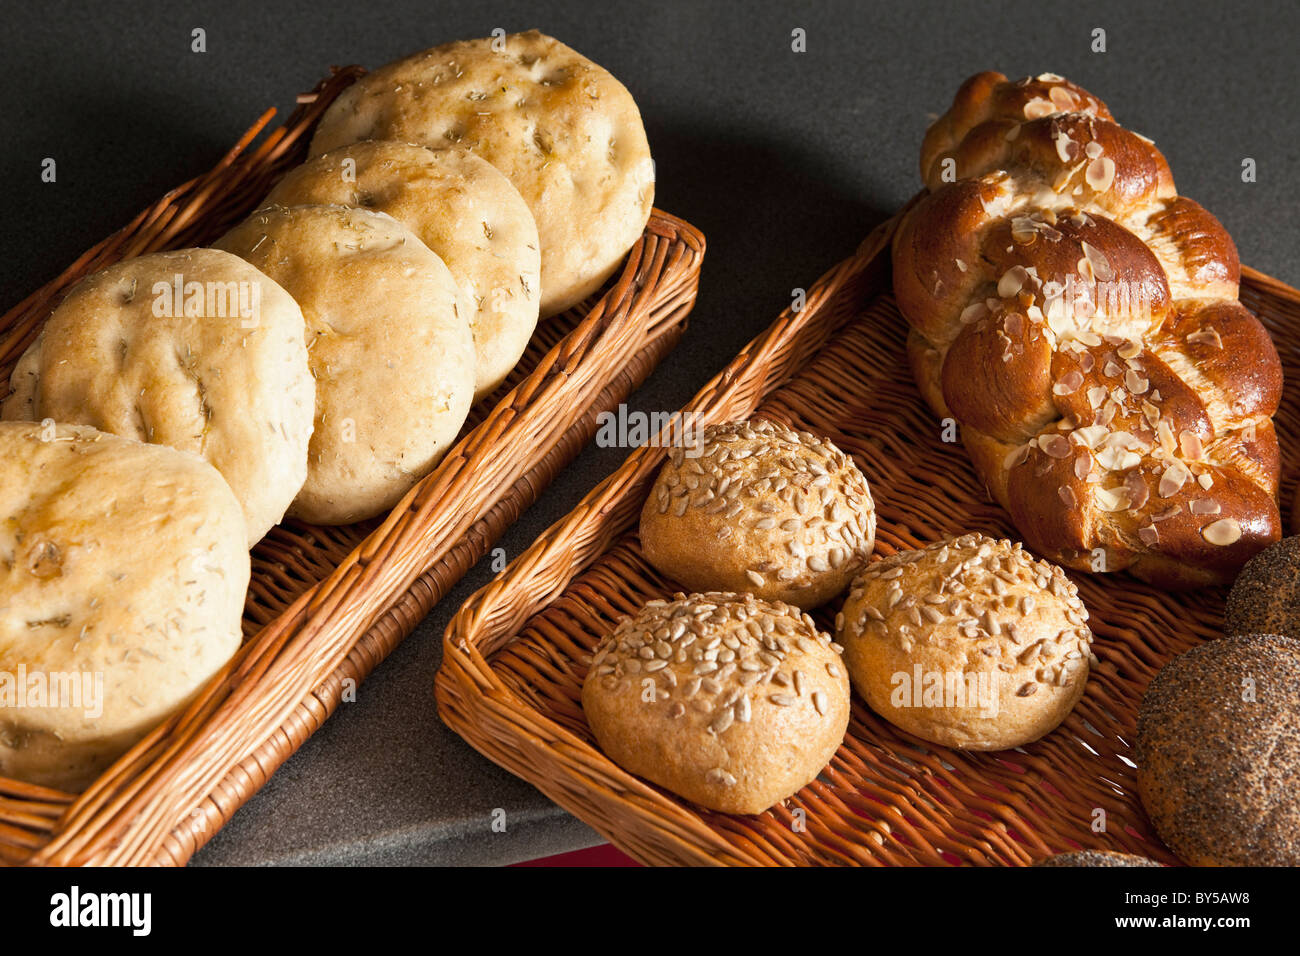 The variety of bread offered in a bakery Stock Photo